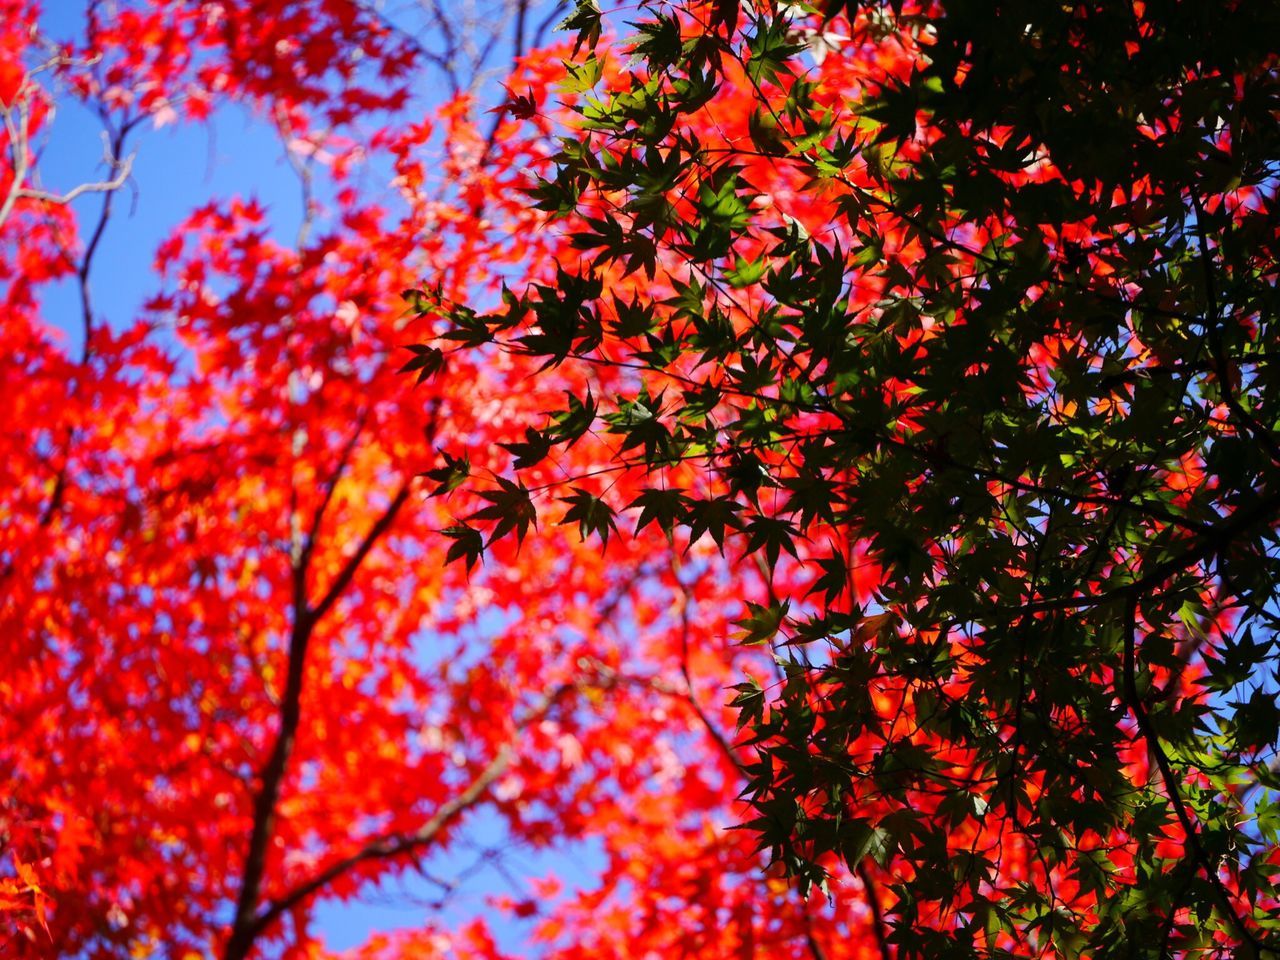 autumn, branch, change, tree, red, season, low angle view, leaf, growth, beauty in nature, nature, orange color, full frame, backgrounds, tranquility, maple leaf, day, outdoors, leaves, no people